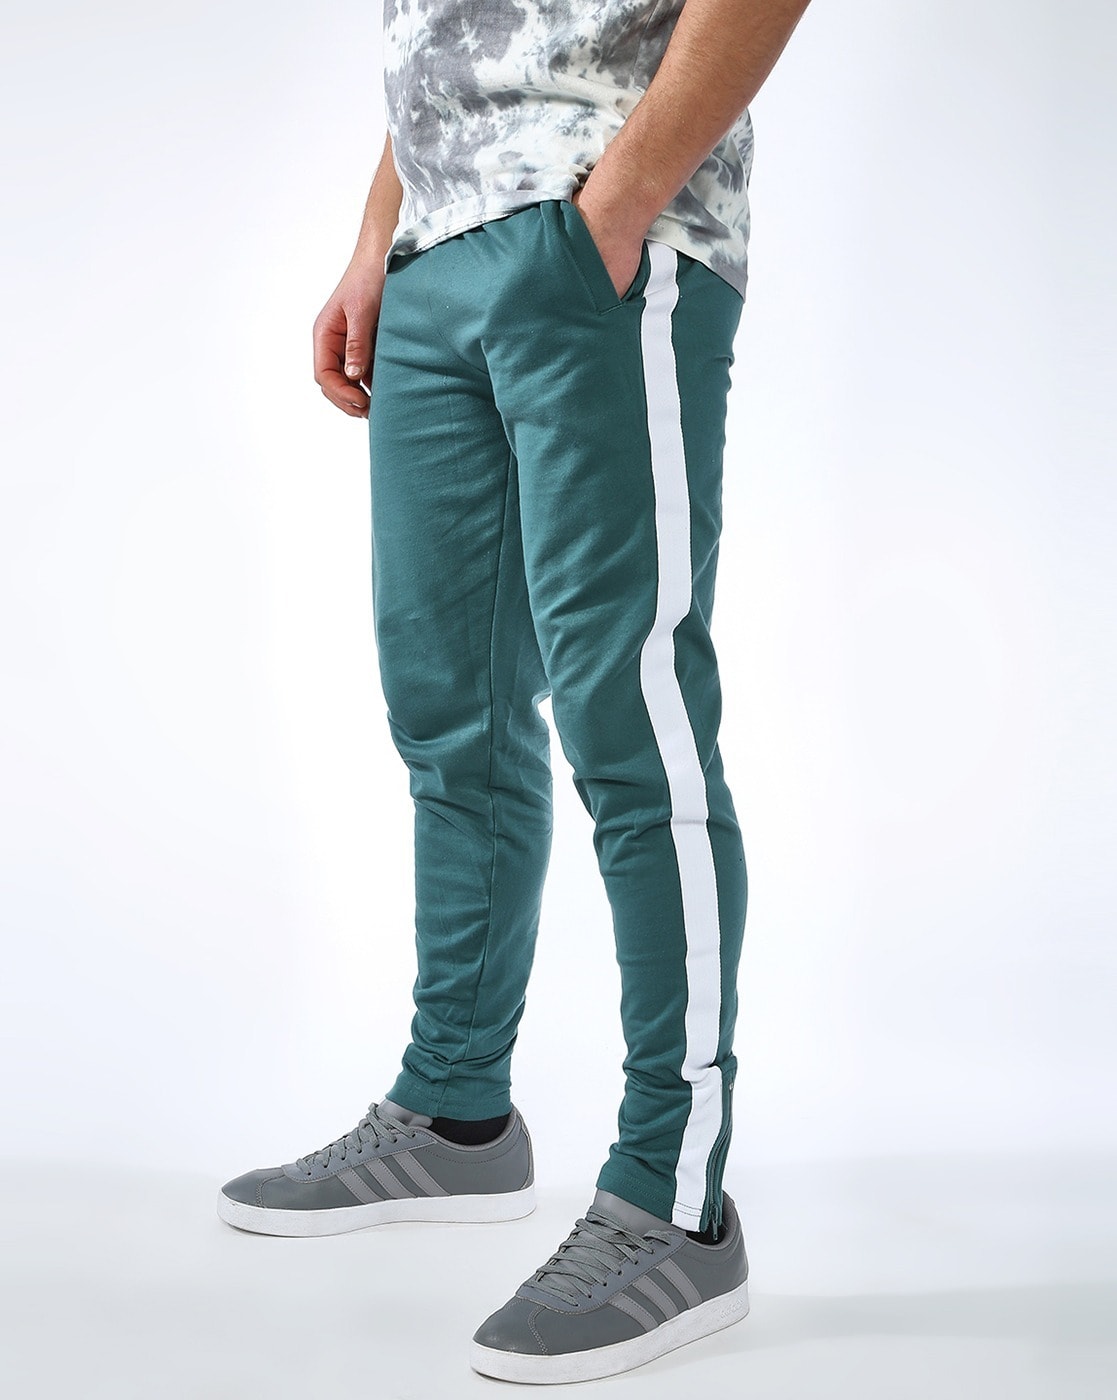 Buy Black Track Pants for Men by DIDA Online | Ajio.com